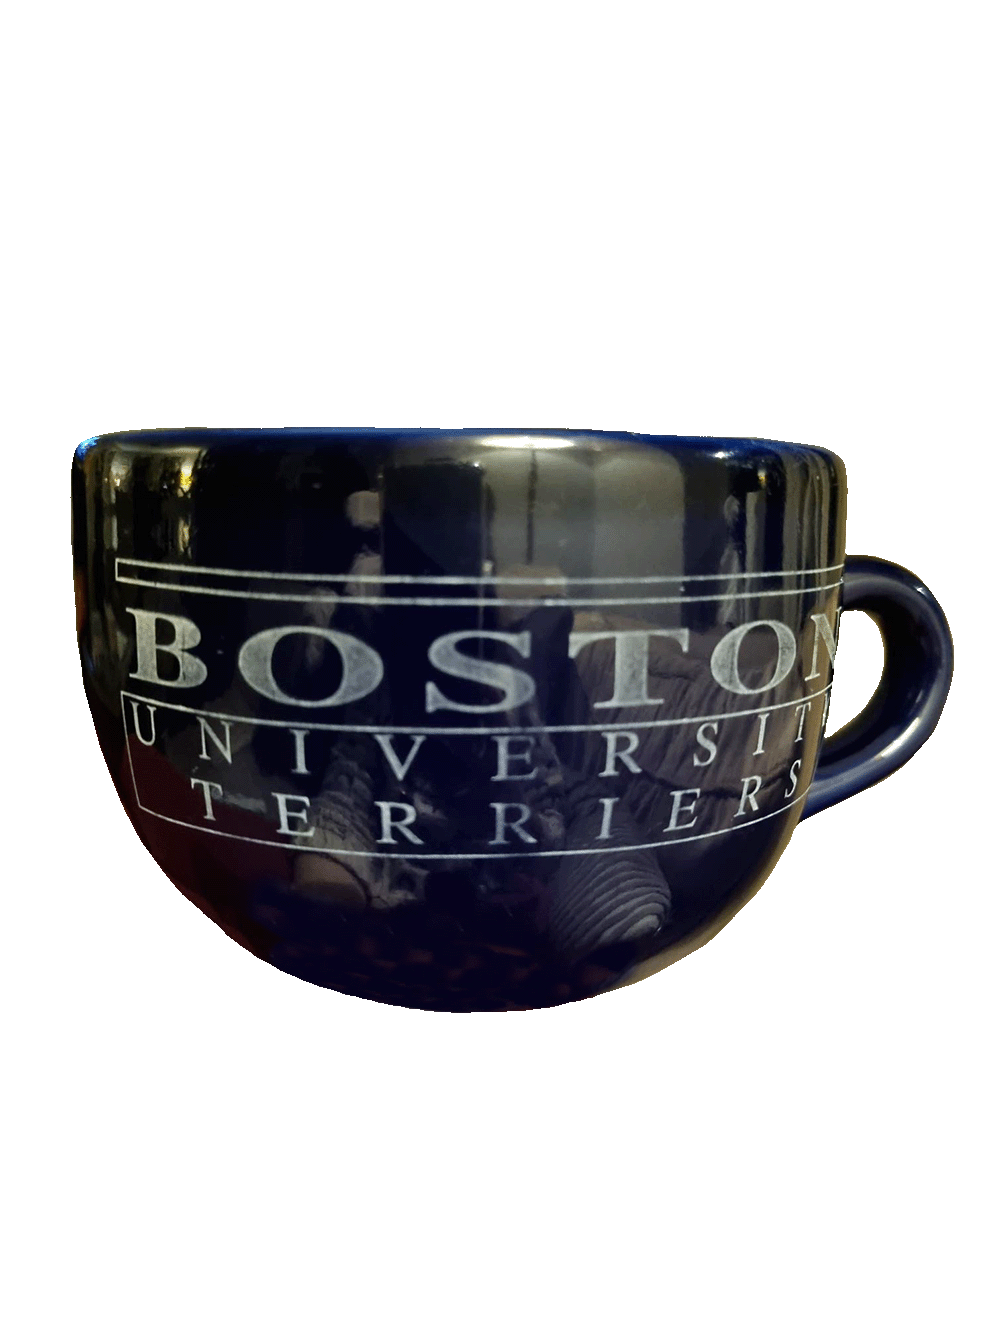 Photo: A stout, shiny black mug with the words "Boston University Terriers" printed on the front in faded white letters.